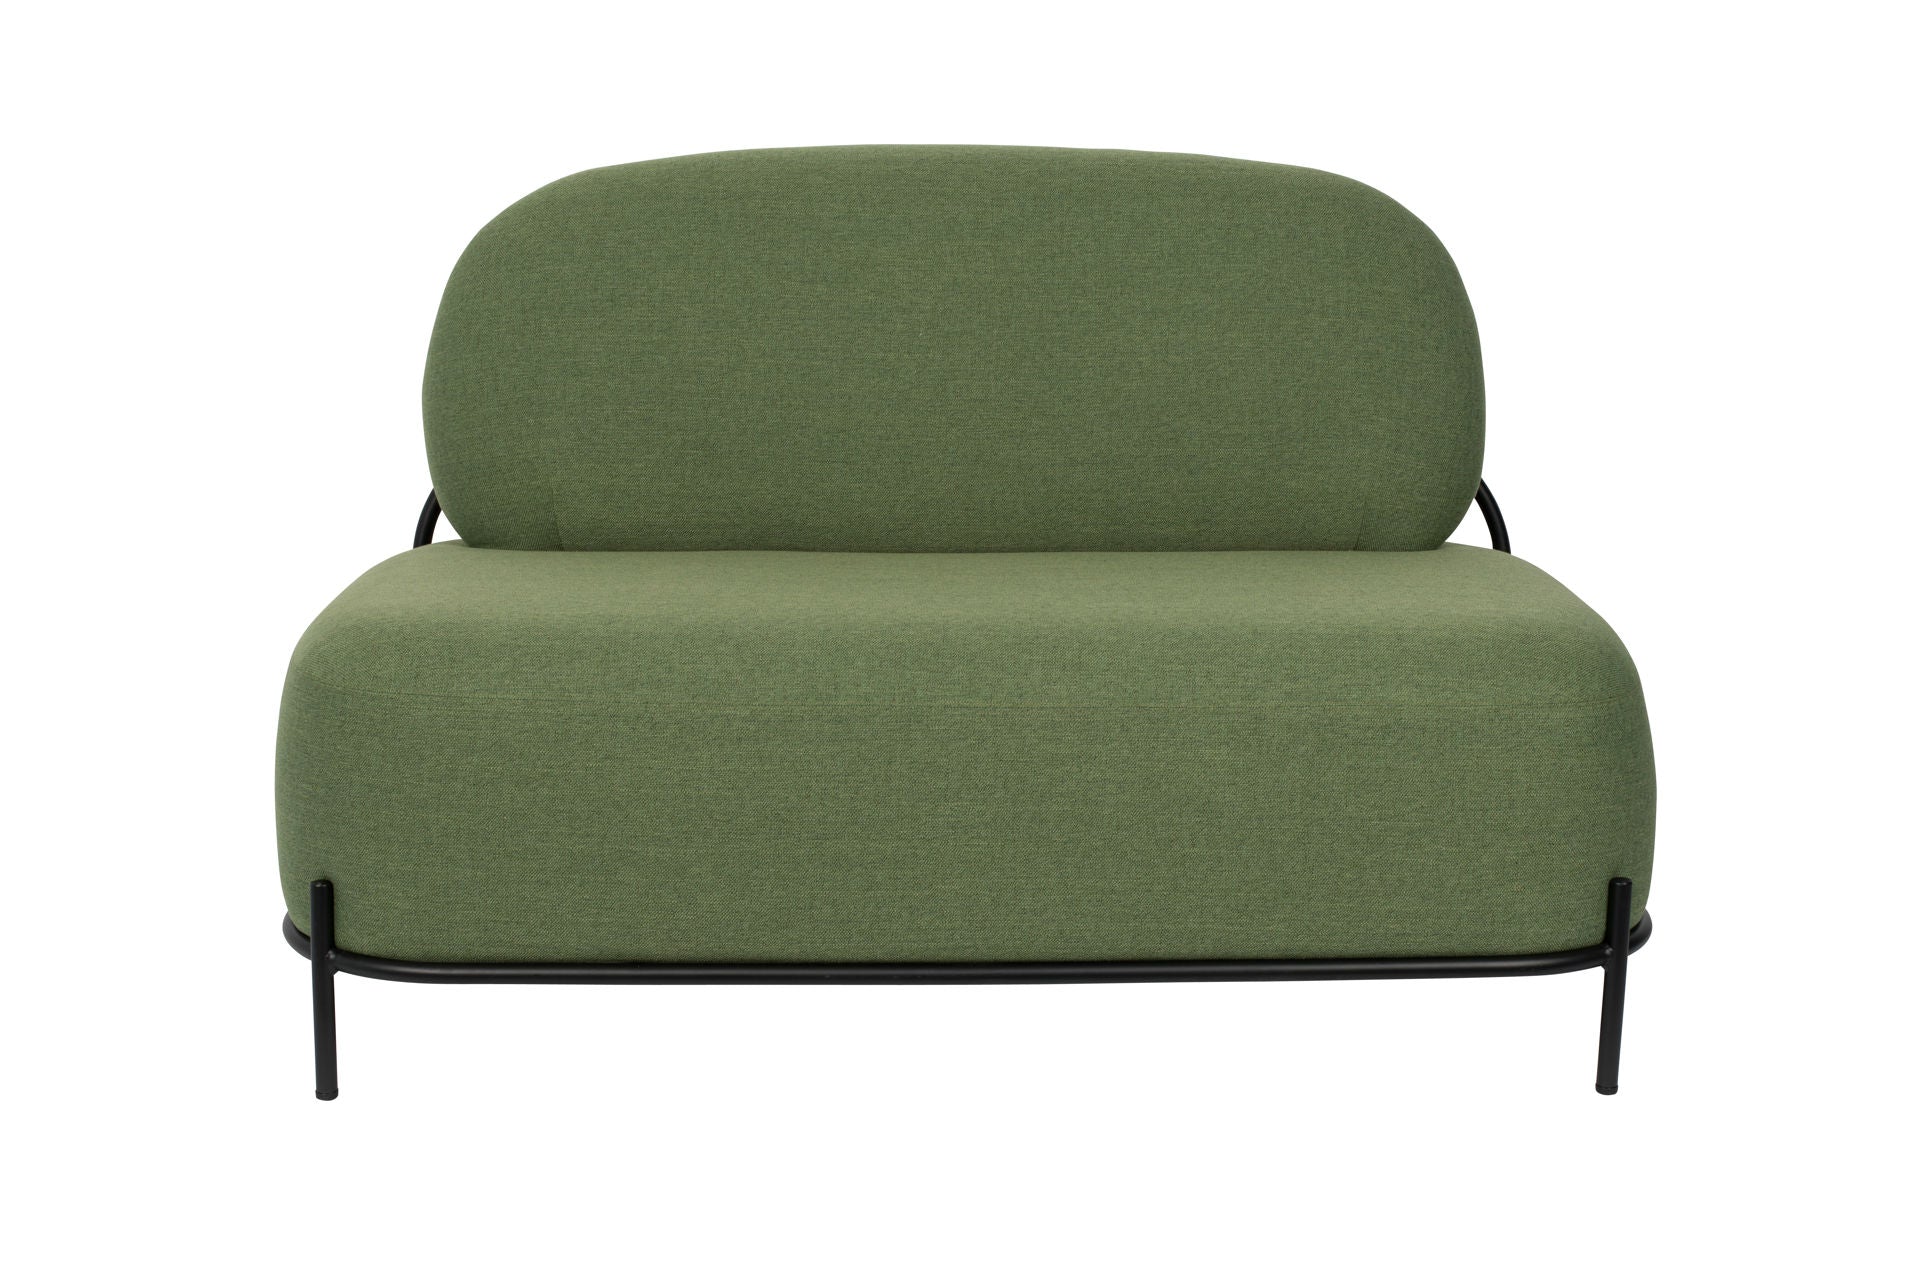 Nancy's Seven Hills Lounge Chair - Industrial - Green - Polyester, Plywood, Iron - 71.5 cm x 125 cm x 77 cm